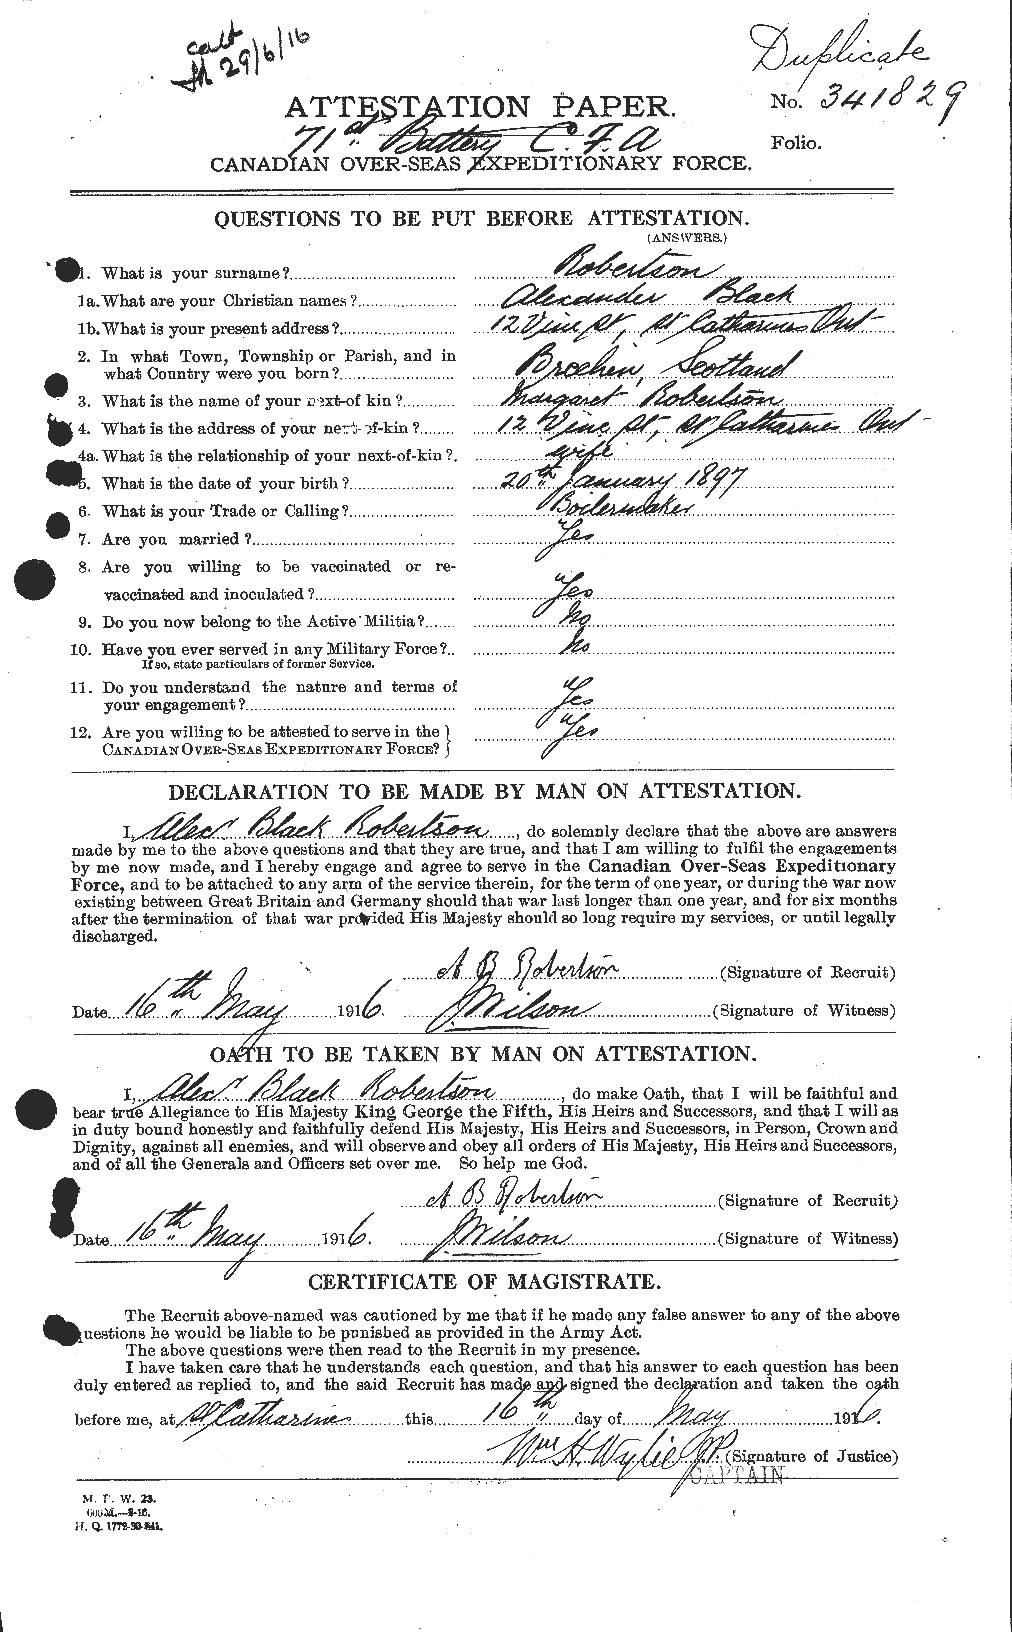 Personnel Records of the First World War - CEF 606604a